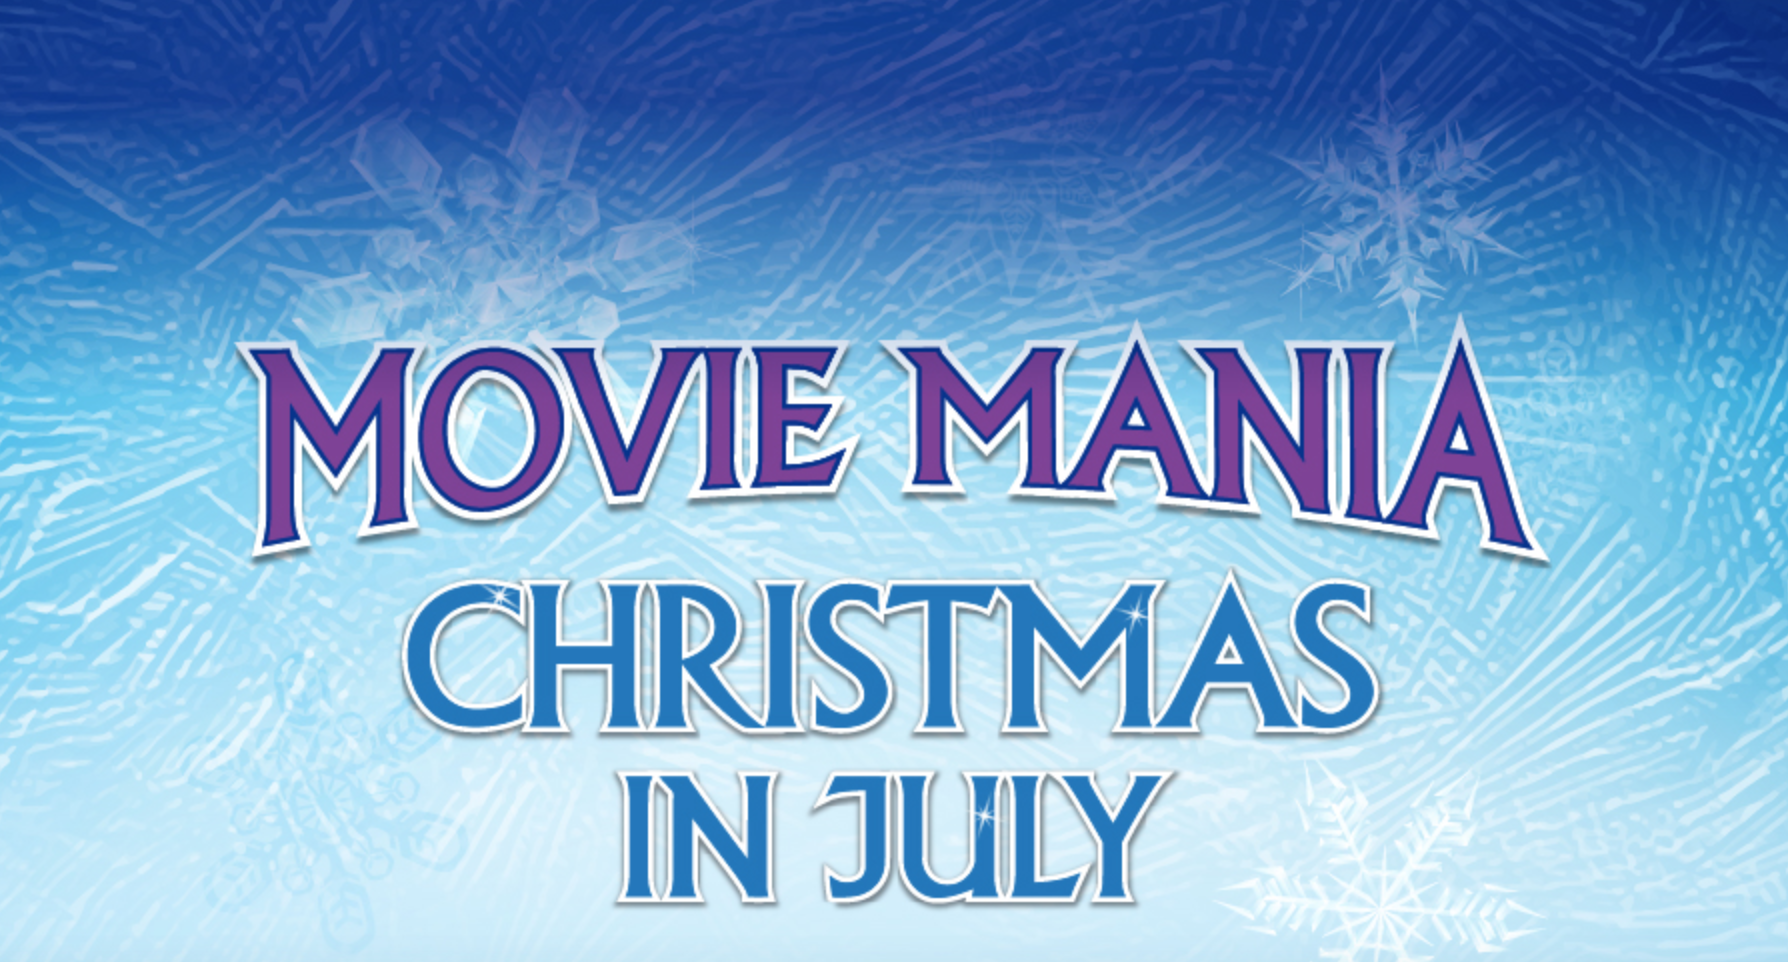 Movie Mania Christmas in July